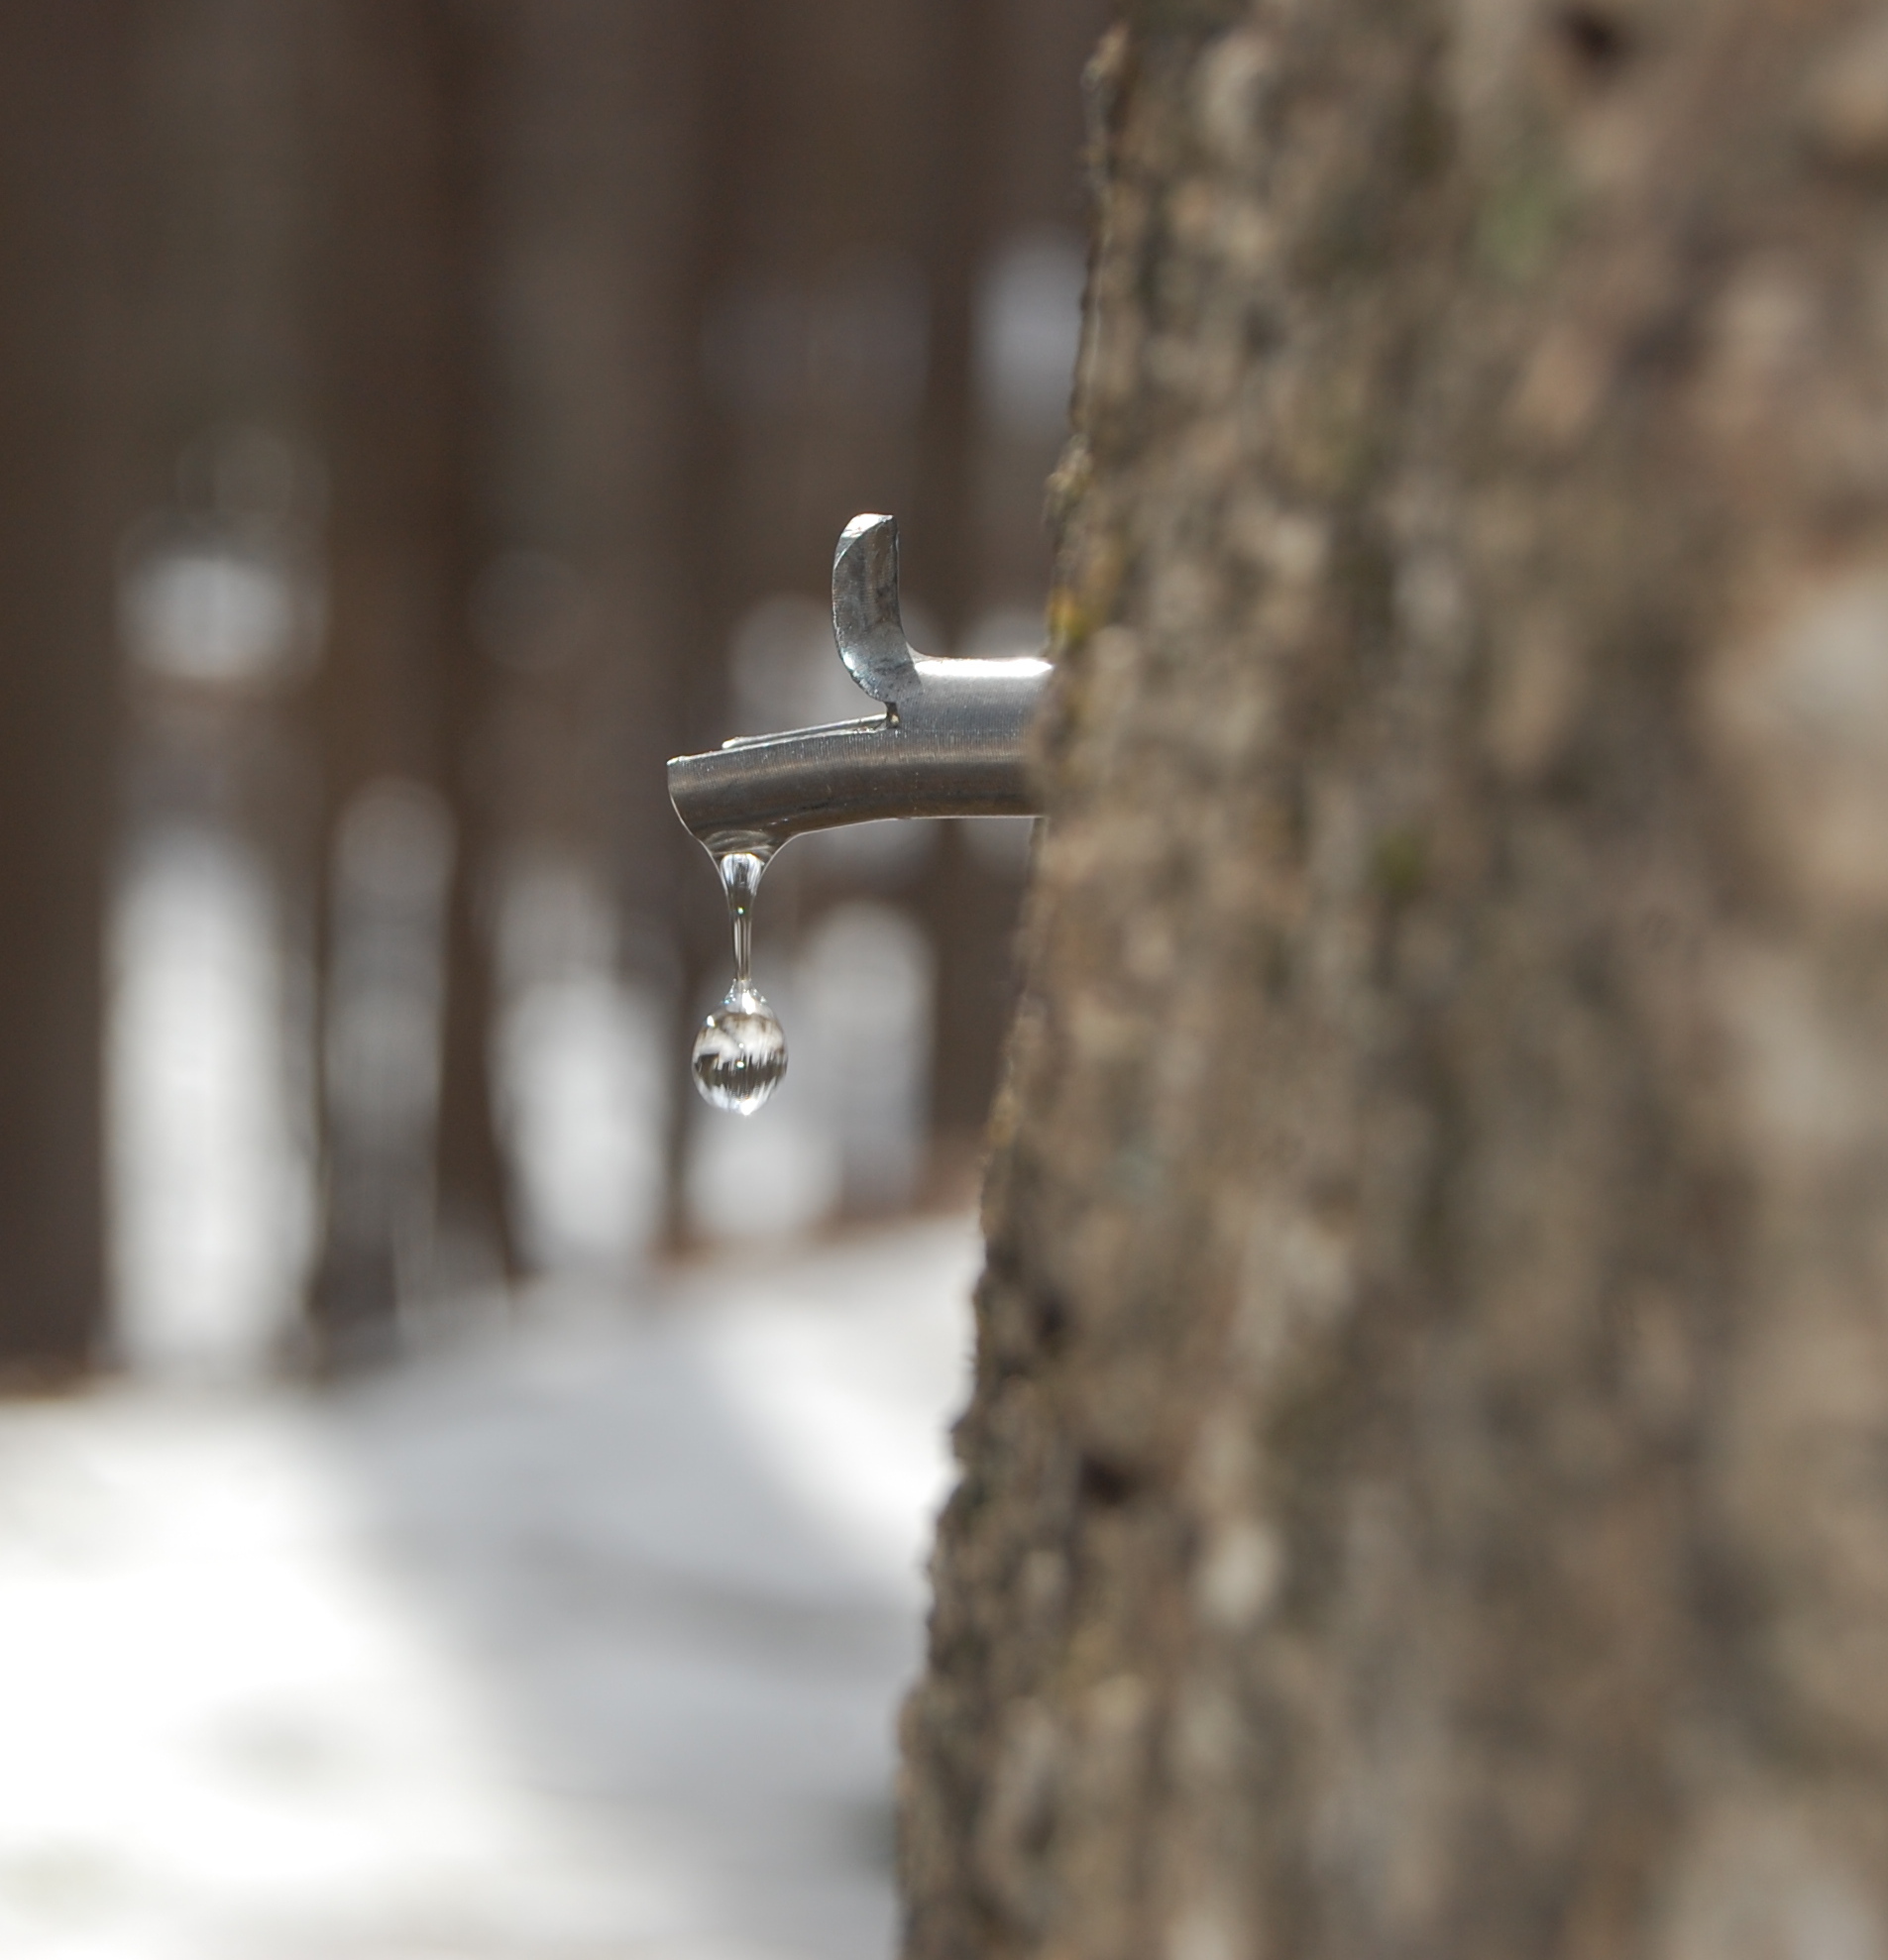 Sap dripping from spout in maple tree